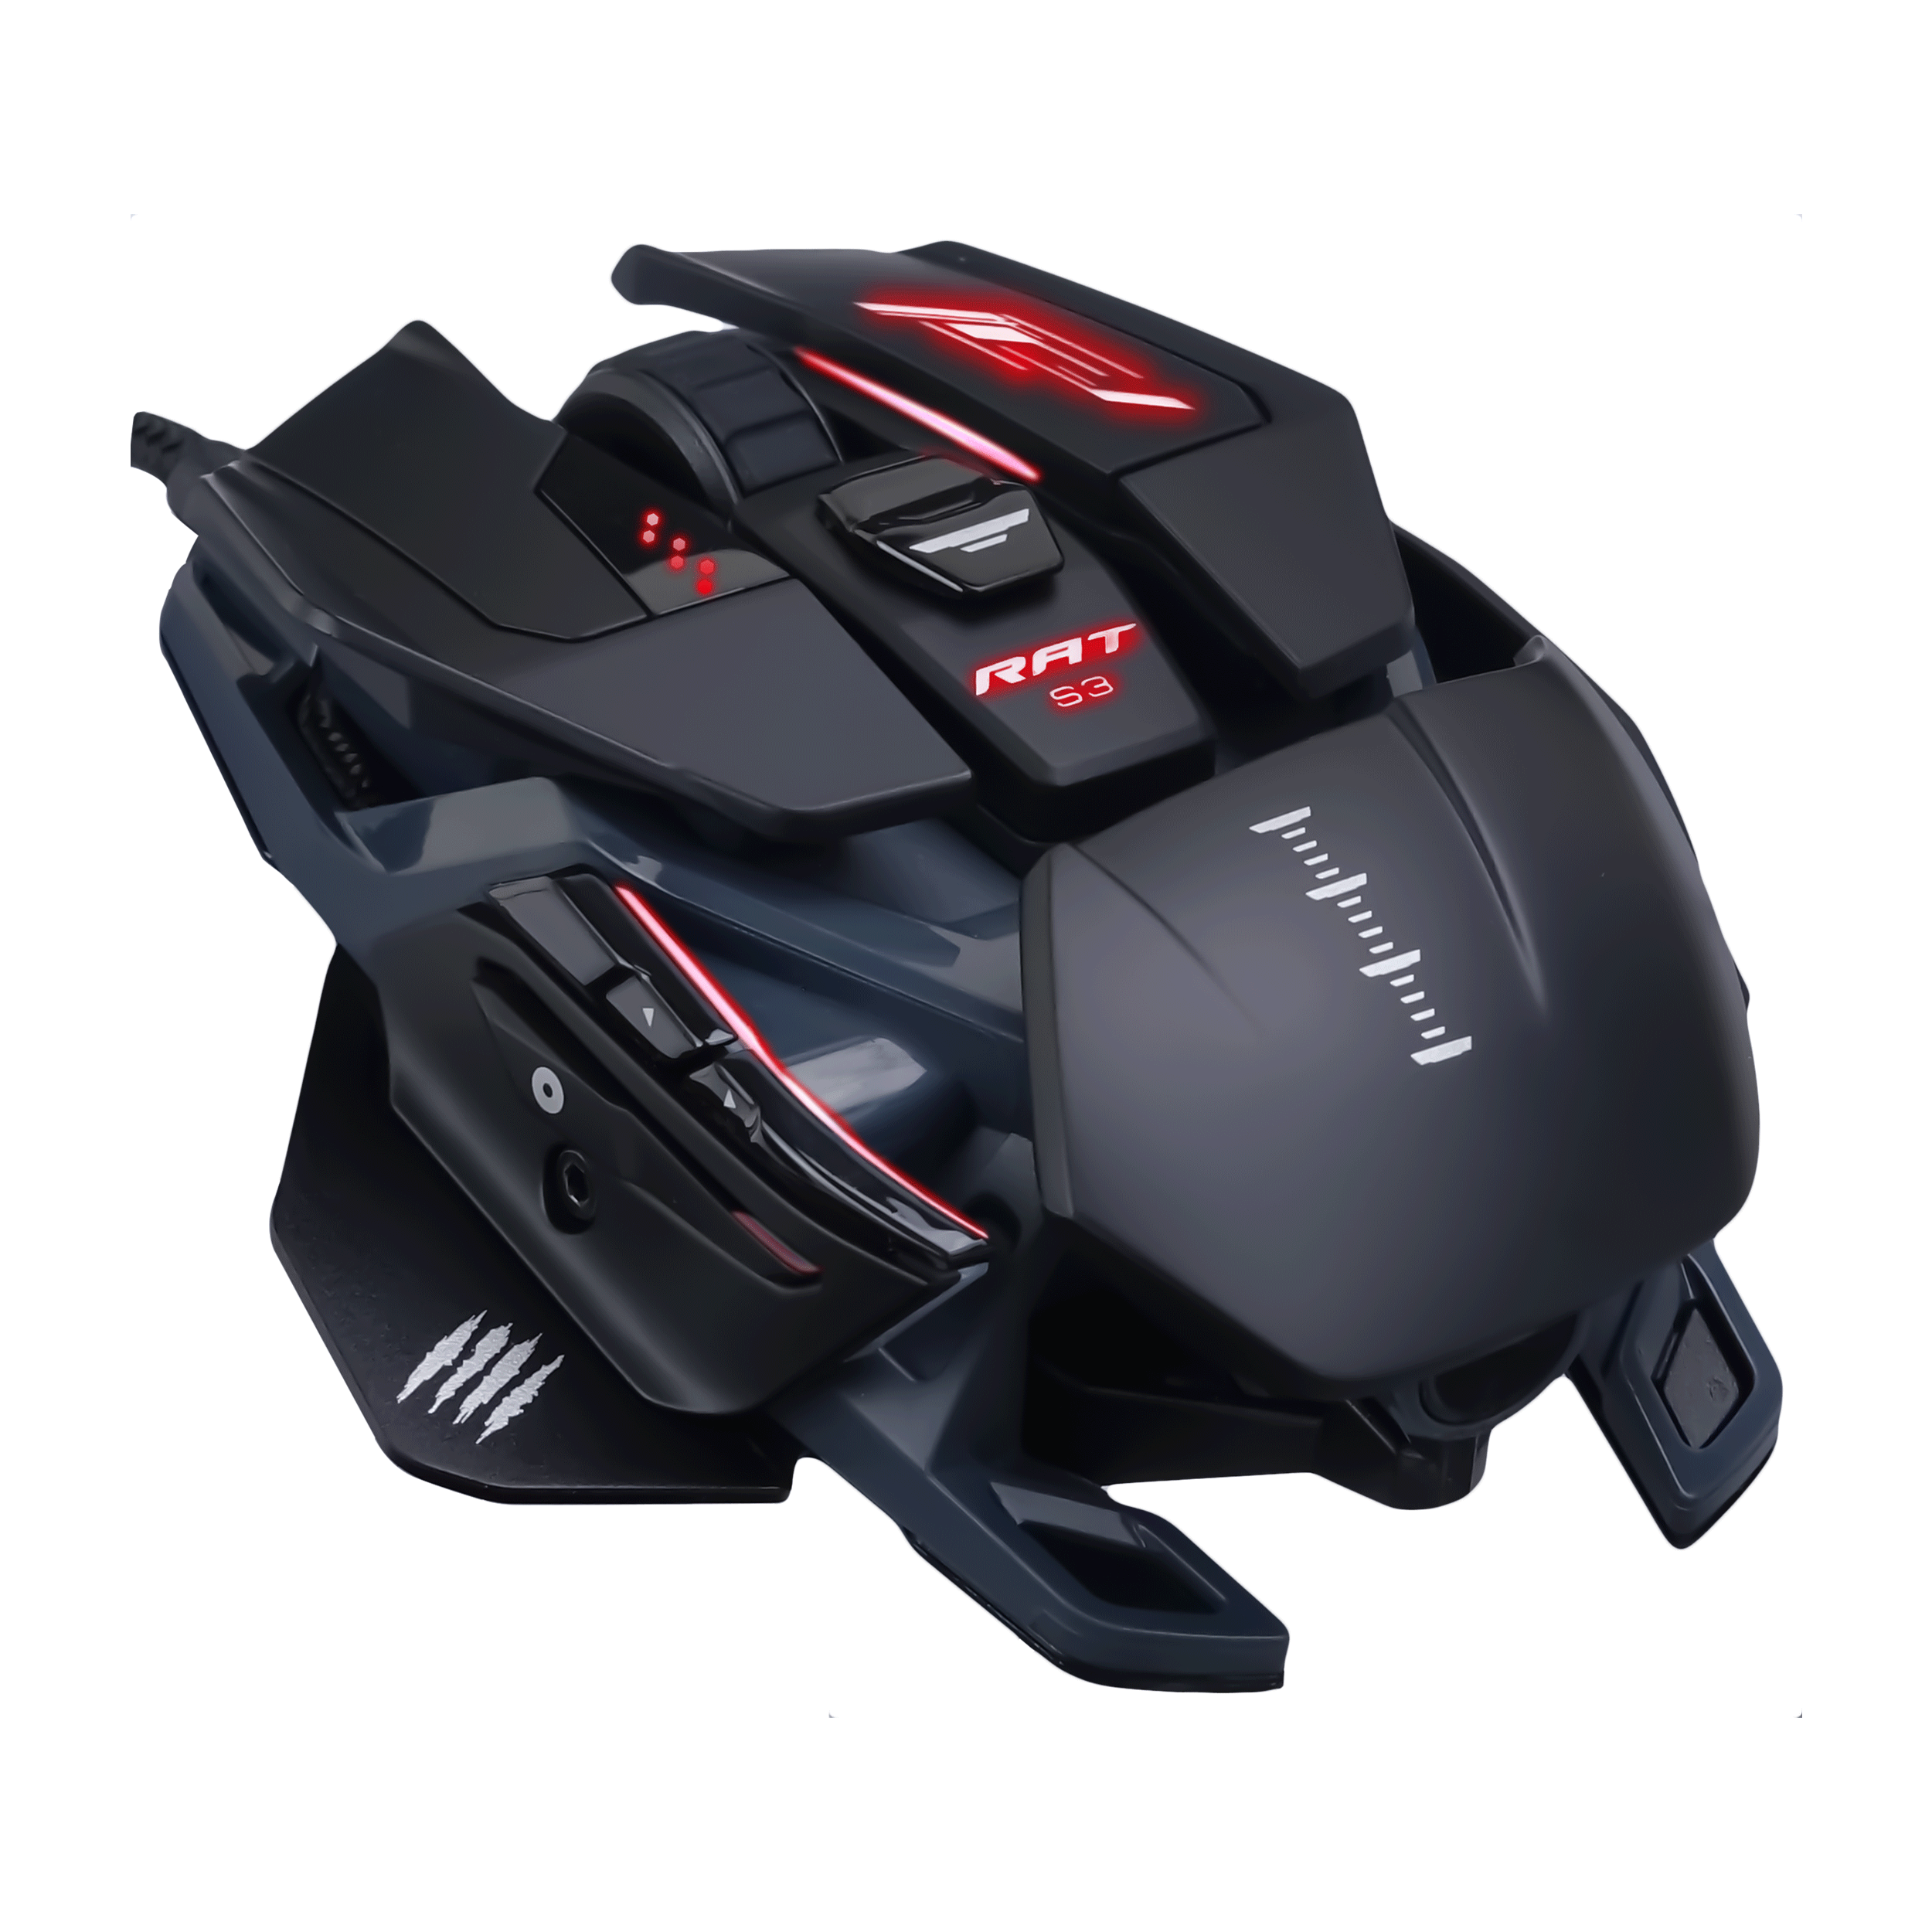 Gaming Schwarz MAD Pro S3 R.A.T. CATZ Mouse,